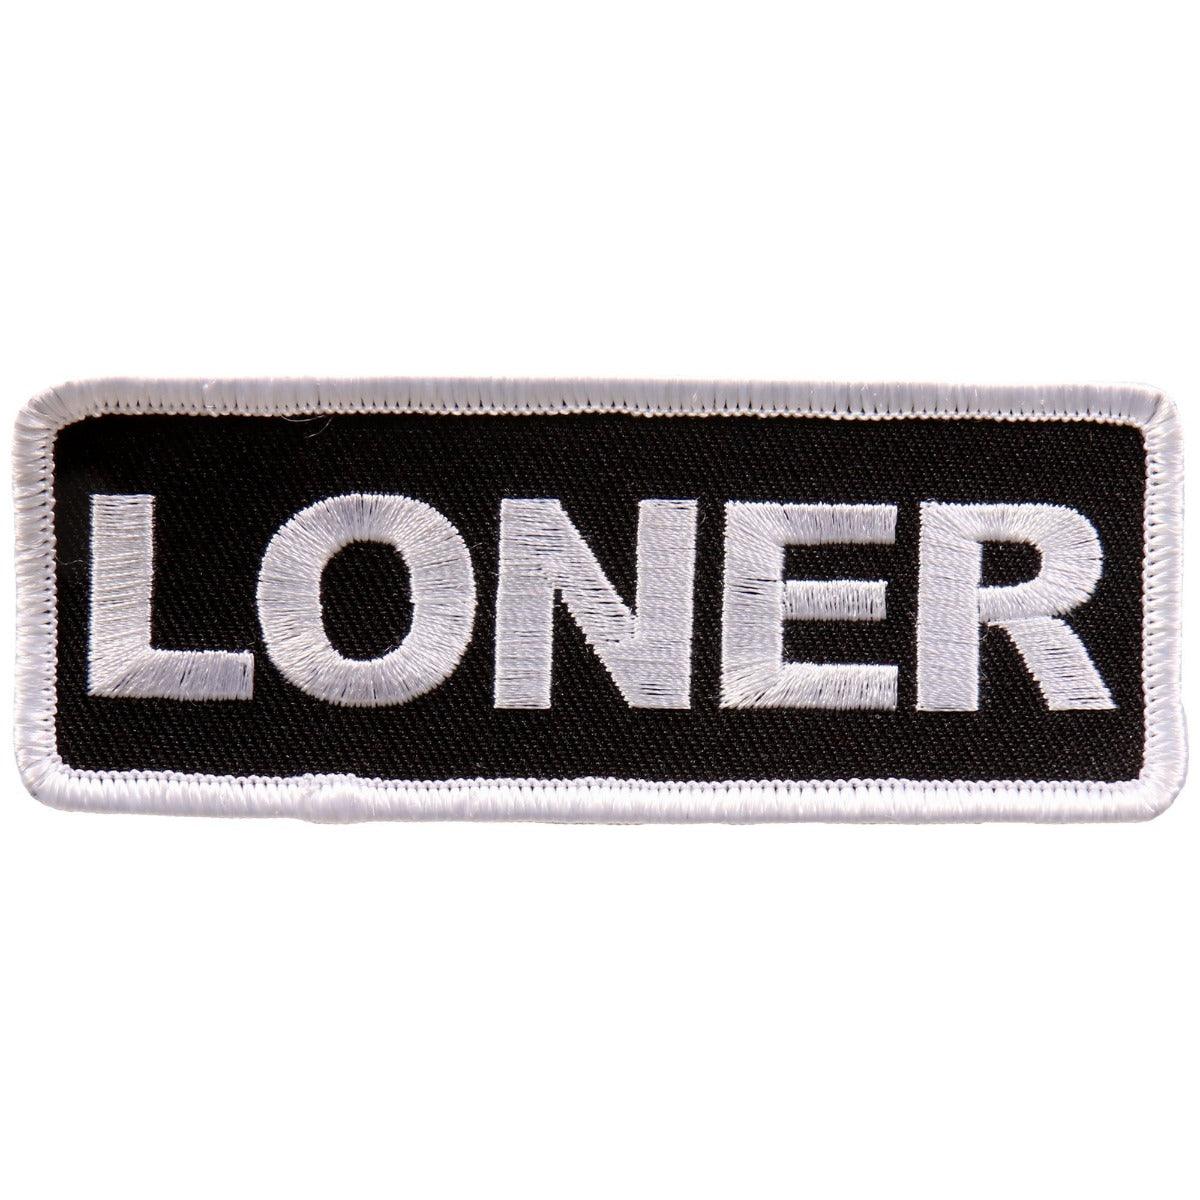 Hot Leathers Loner 4"X2" Patch - American Legend Rider